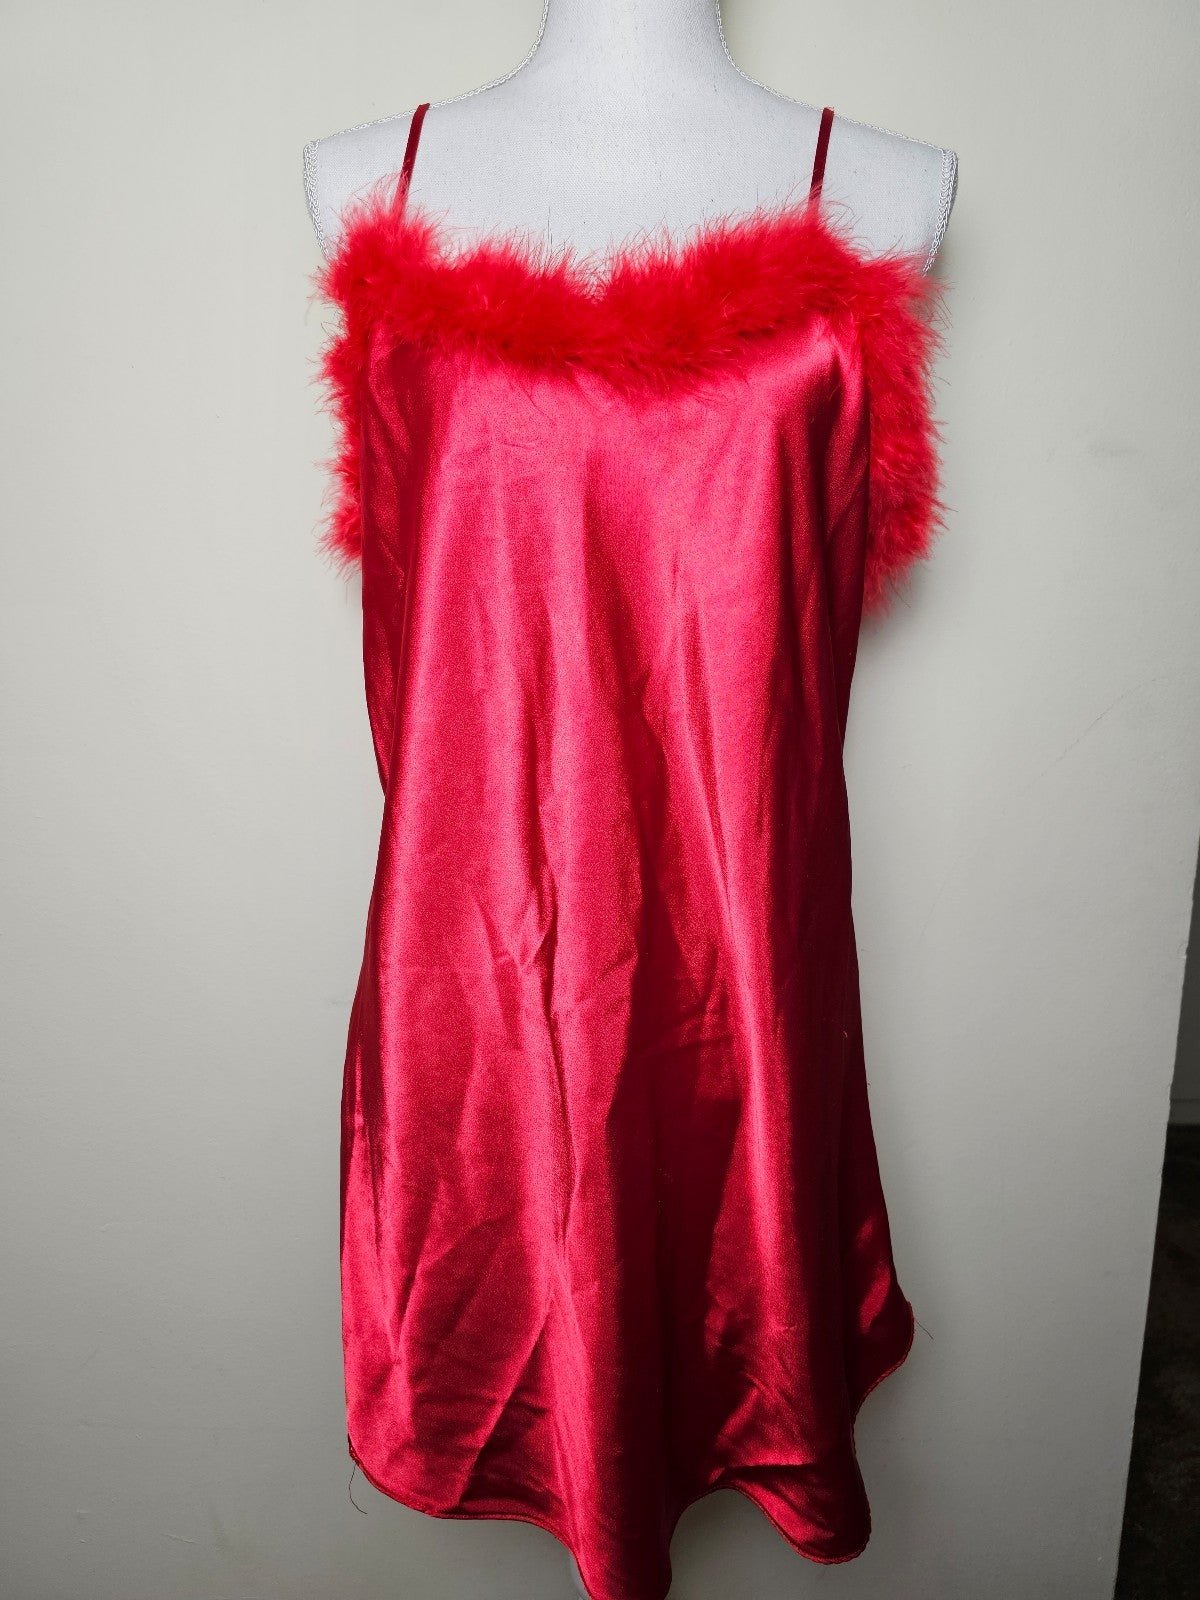 Wholesale price Red Satin Feather Sexy Night Gown Vintage HQAv4FFQ0 Great